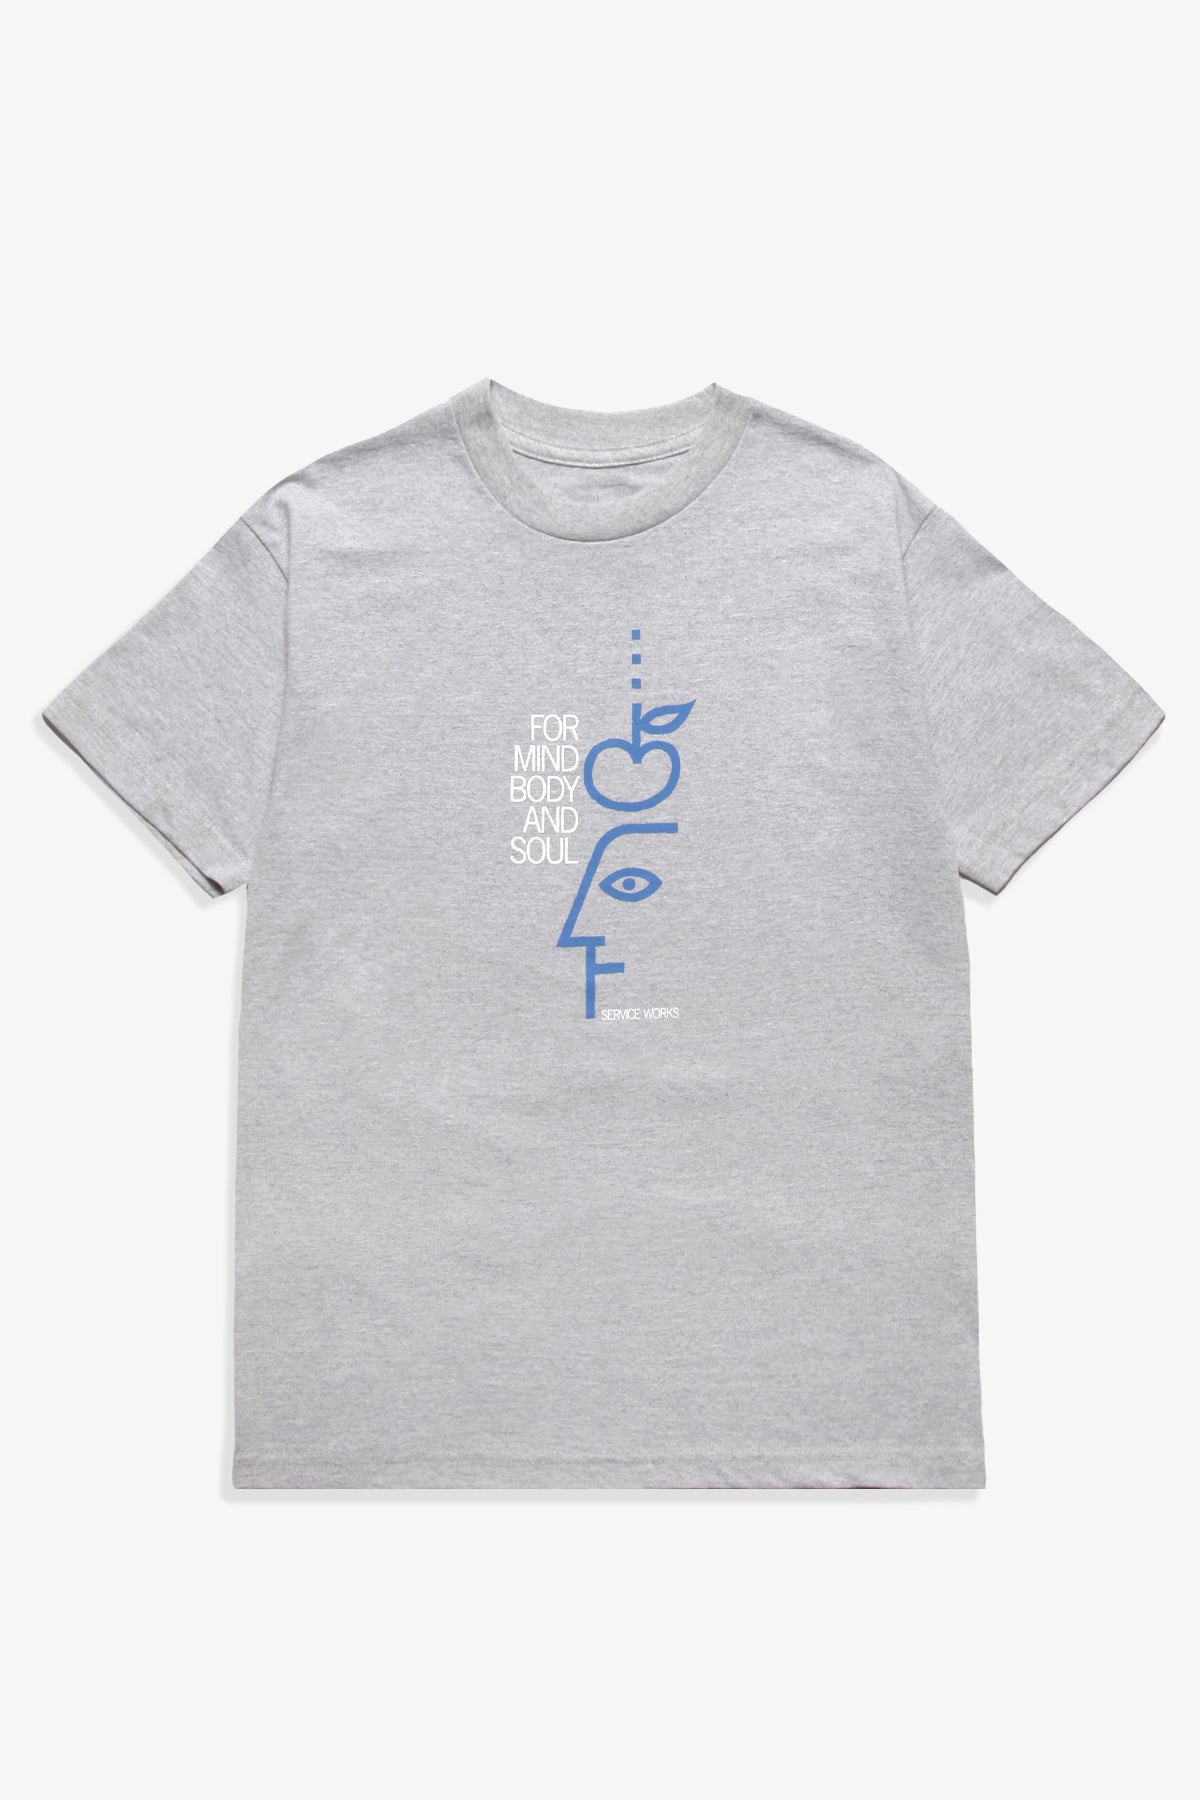 Service Works - Mind, Body and Soul Tee - Ash